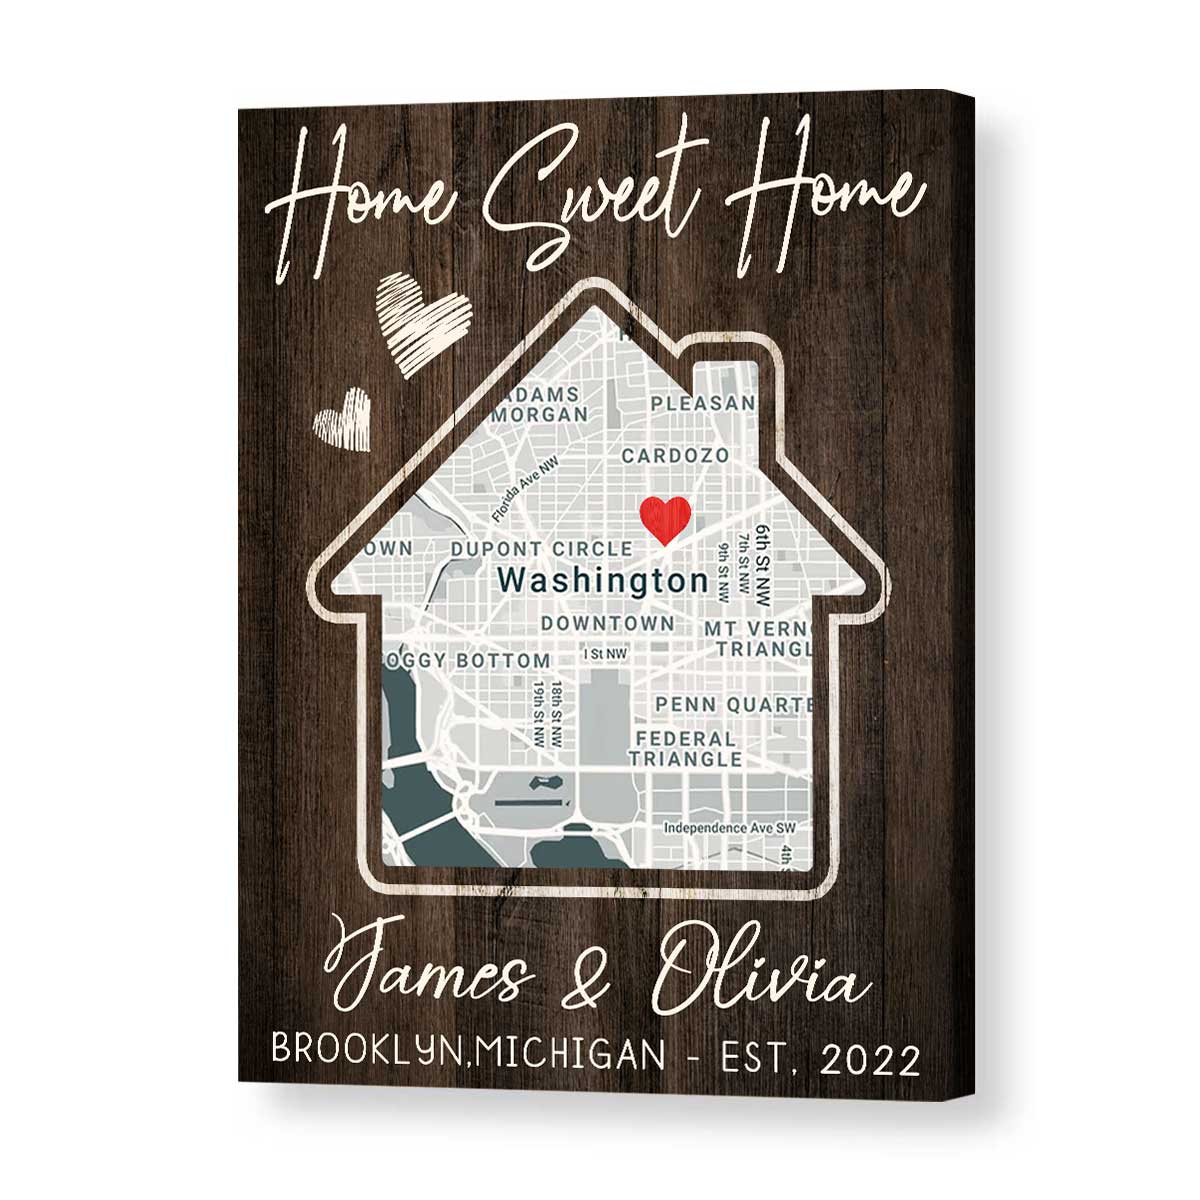 Gifts for New Home | House Warming Gift Baskets at ArtTownGifts.com